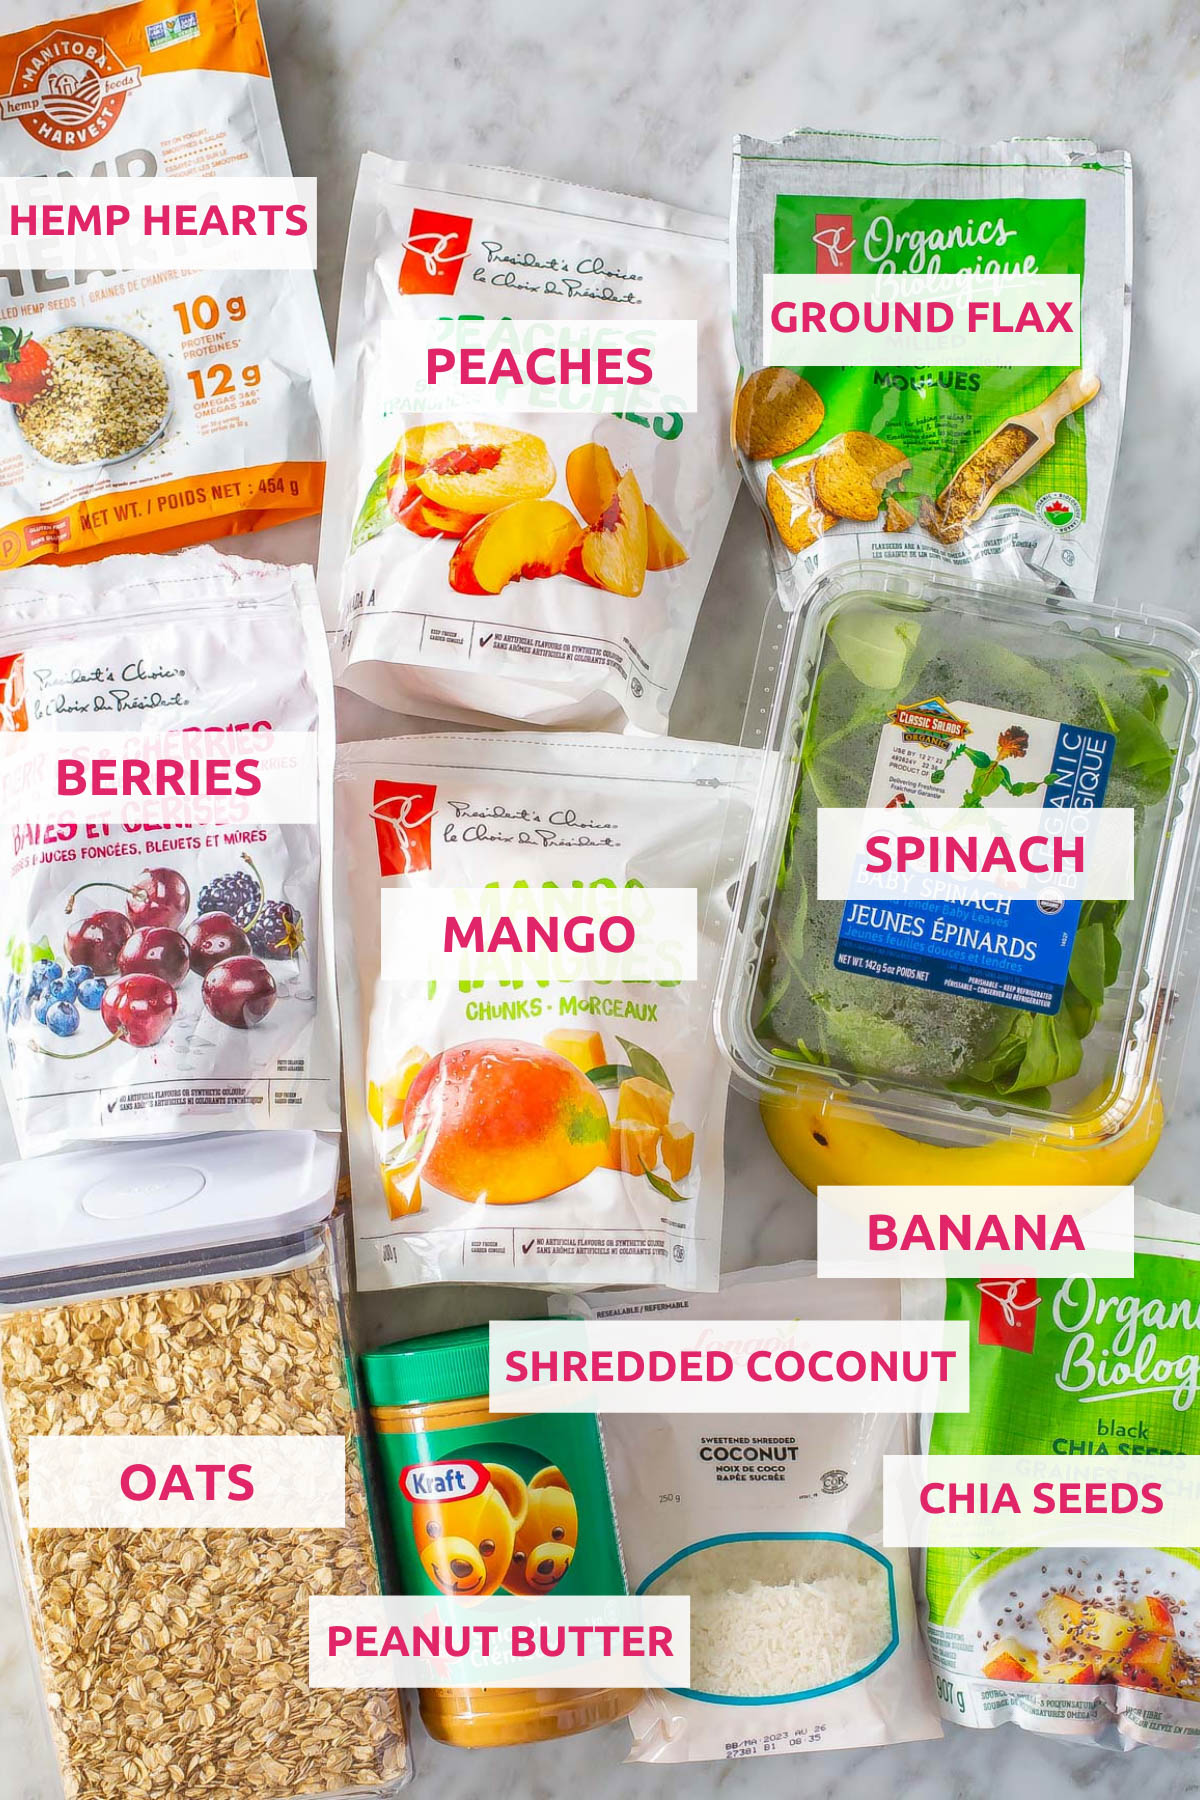 Ingredients for meal prep smoothie packs: hemp hearts, peaches, ground flax, berries, mango, spinach, oats, peanut butter, shredded coconut, banana, and chia seeds.